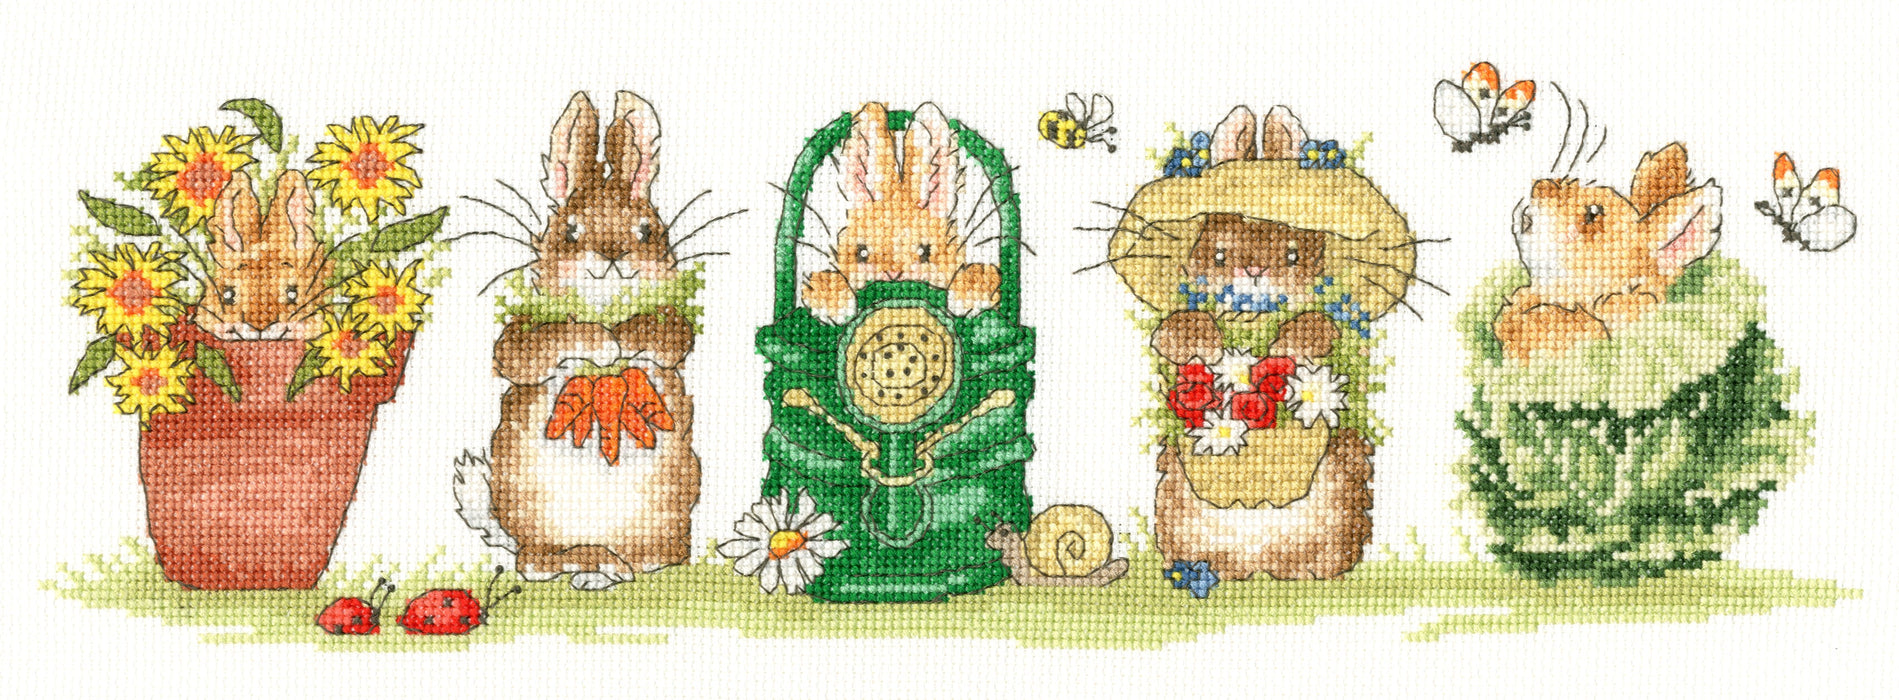 Garden Helpers XMS35 Counted Cross Stitch Kit